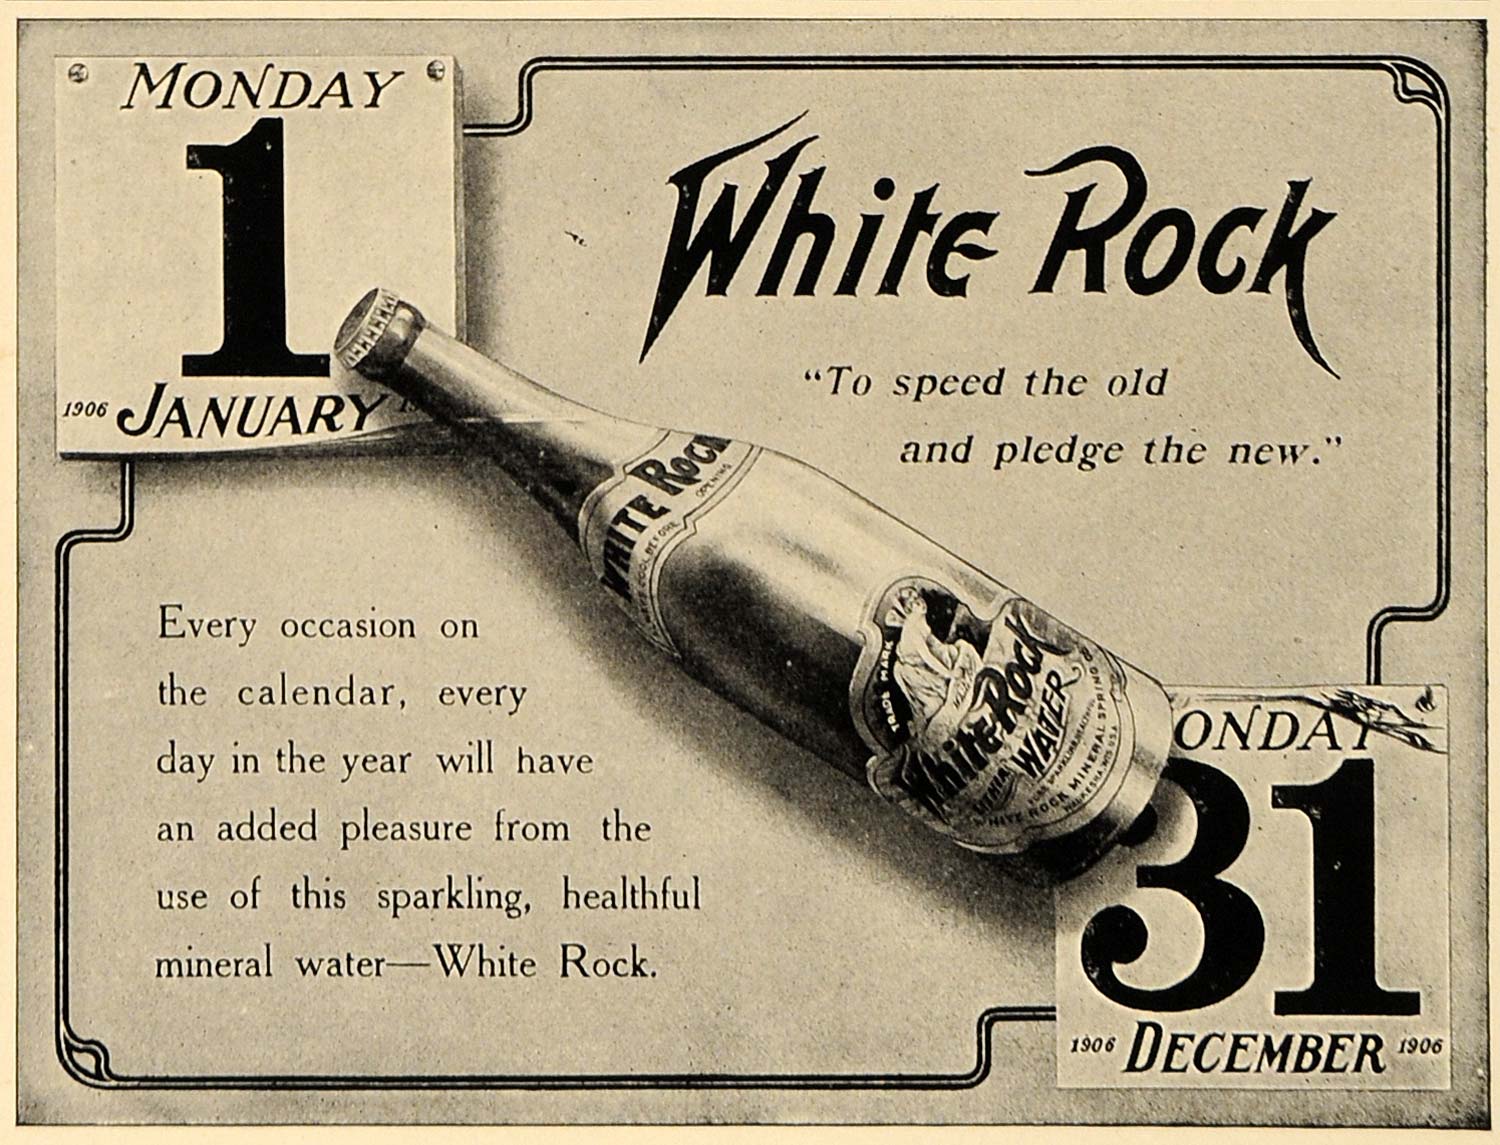 1906 Ad New Years White Rock Water Speed Old Pledge New - ORIGINAL CL9